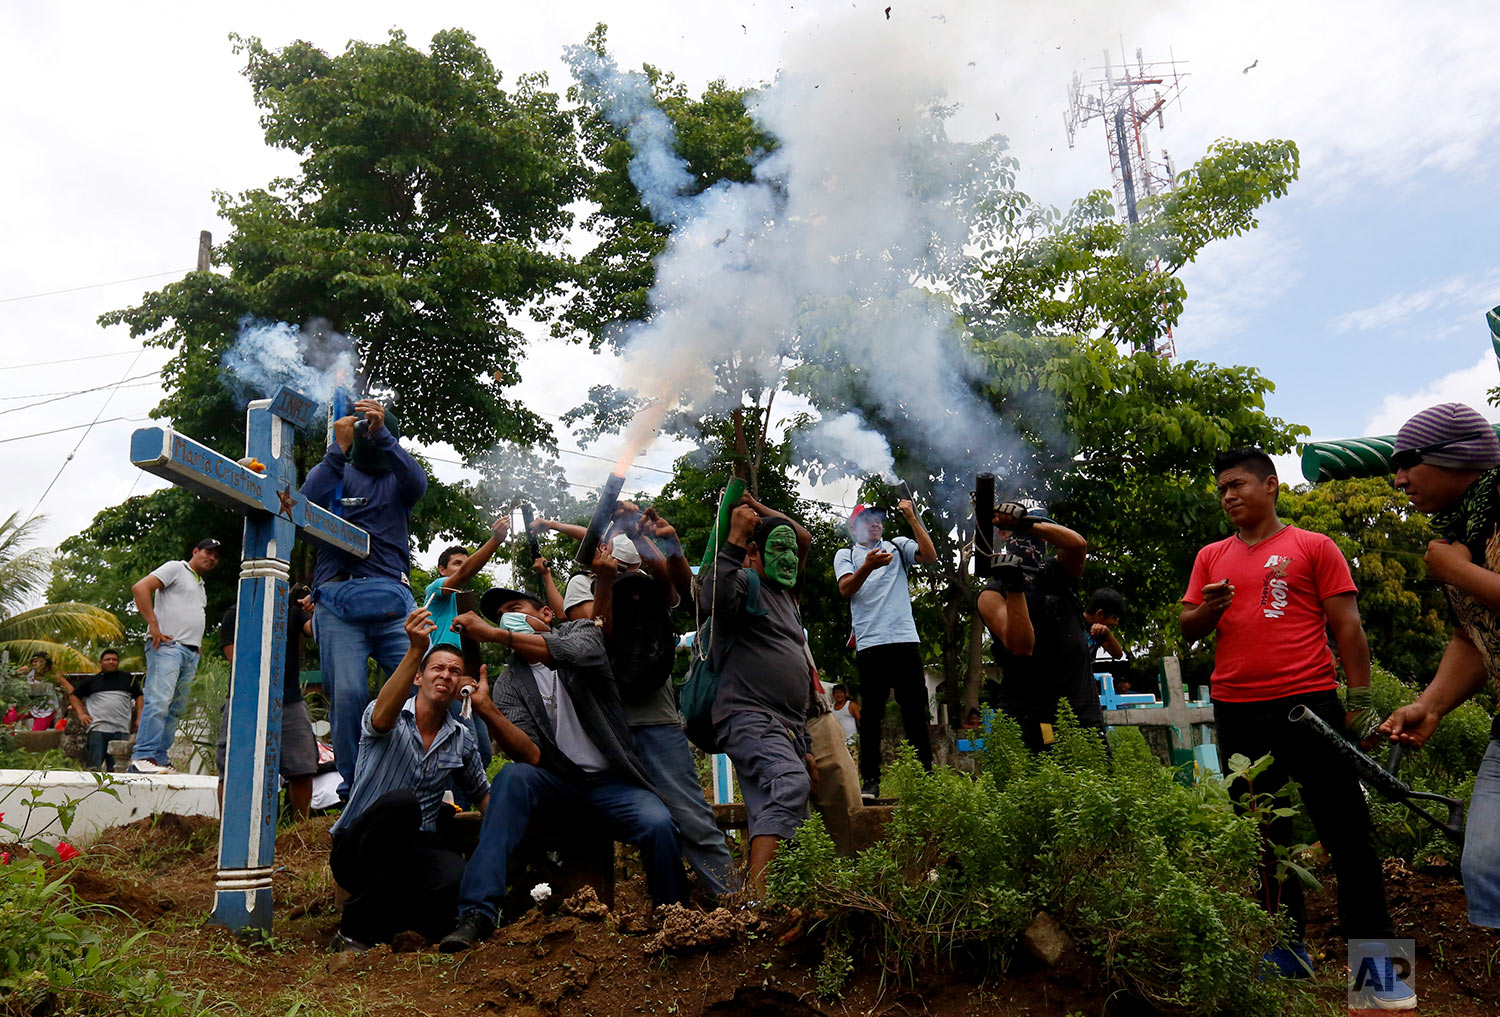  Anti-government protesters shoot their homemade weapons as they bury a fellow protester, Jorge Zepeda who was killed during a demonstration, at the cemetery in Monimbo, Nicaragua, June 7, 2018. (AP Photo/Alfredo Zuniga) 